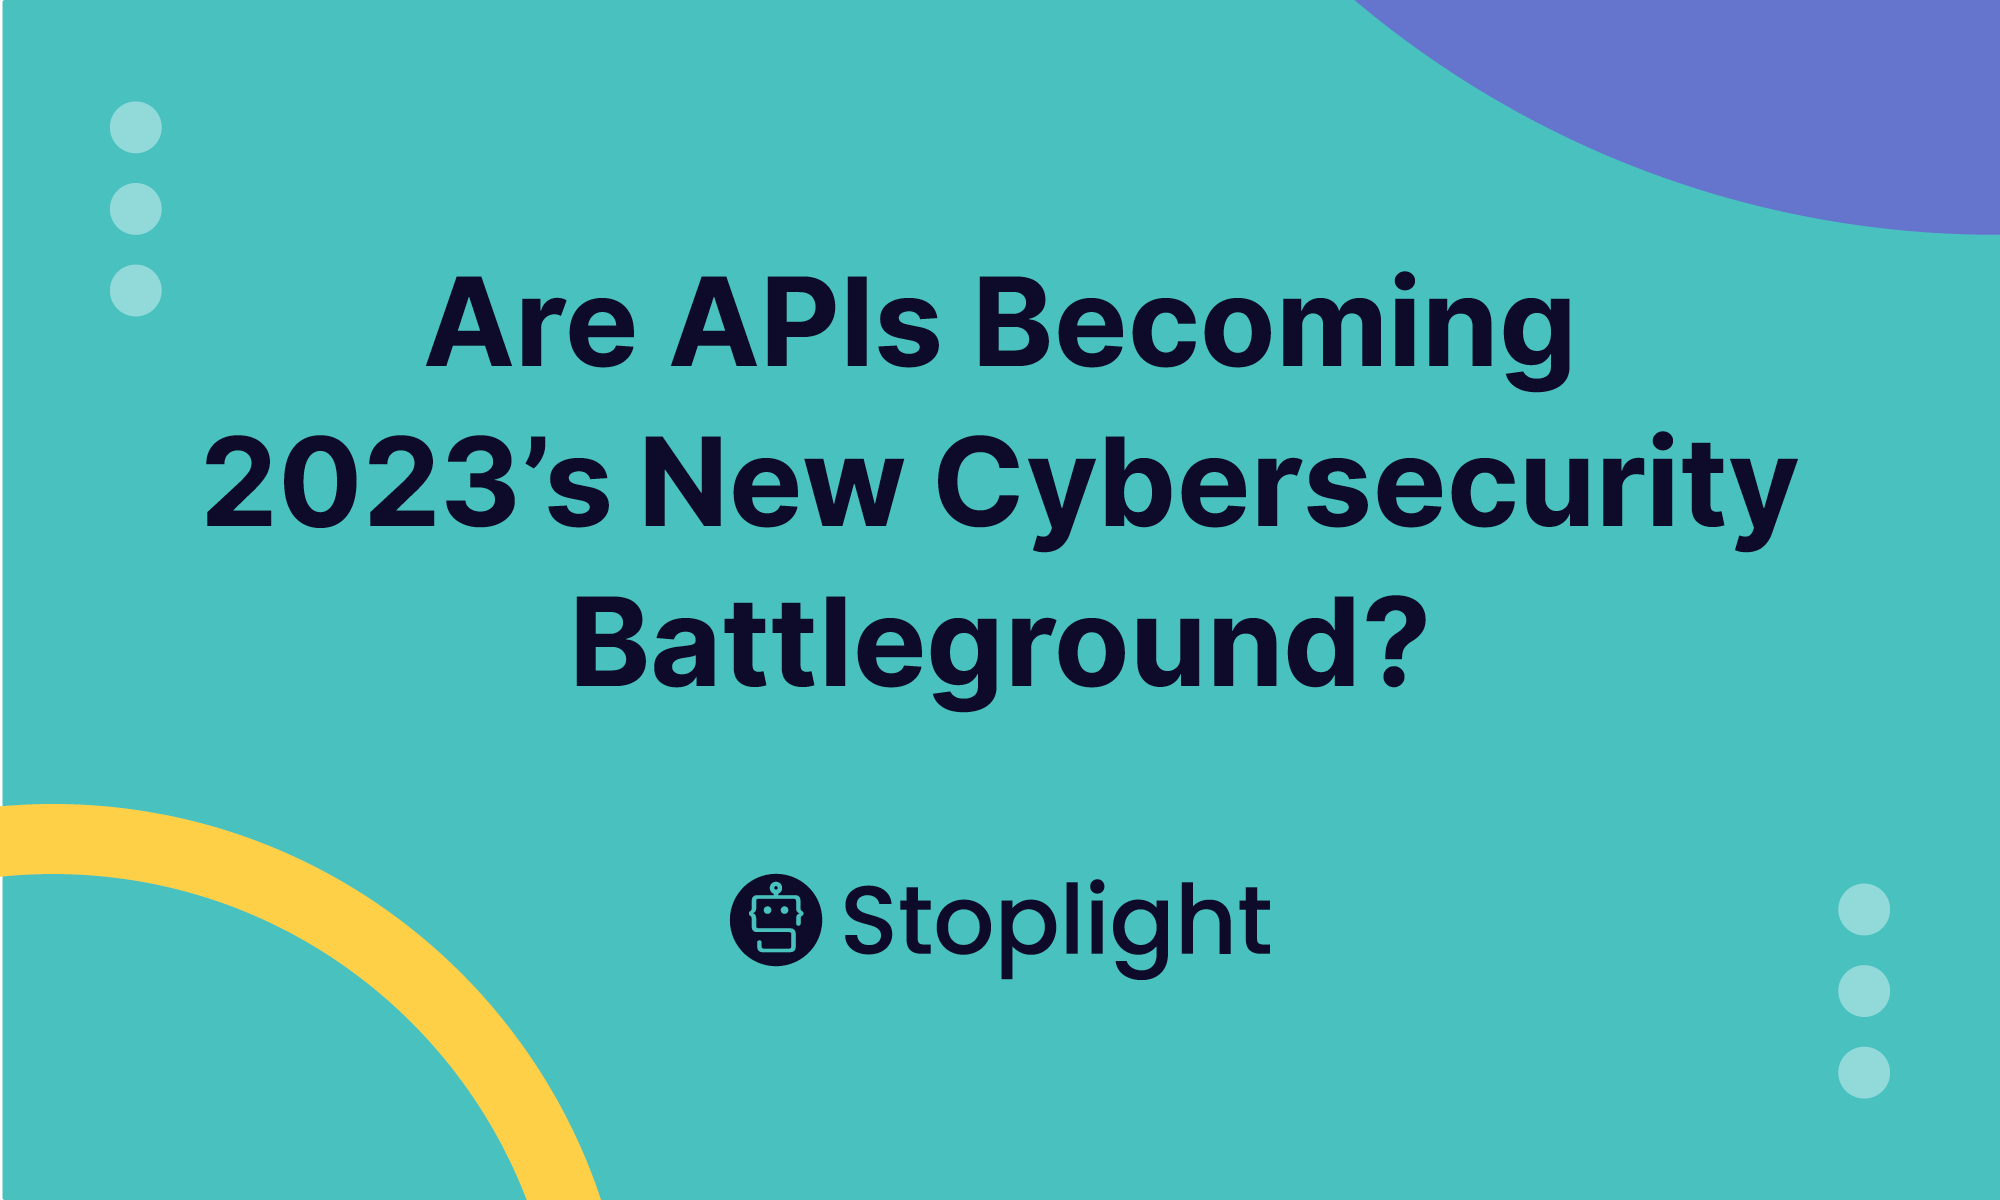 Are APIs Becoming 2023’s New Cybersecurity Battleground?